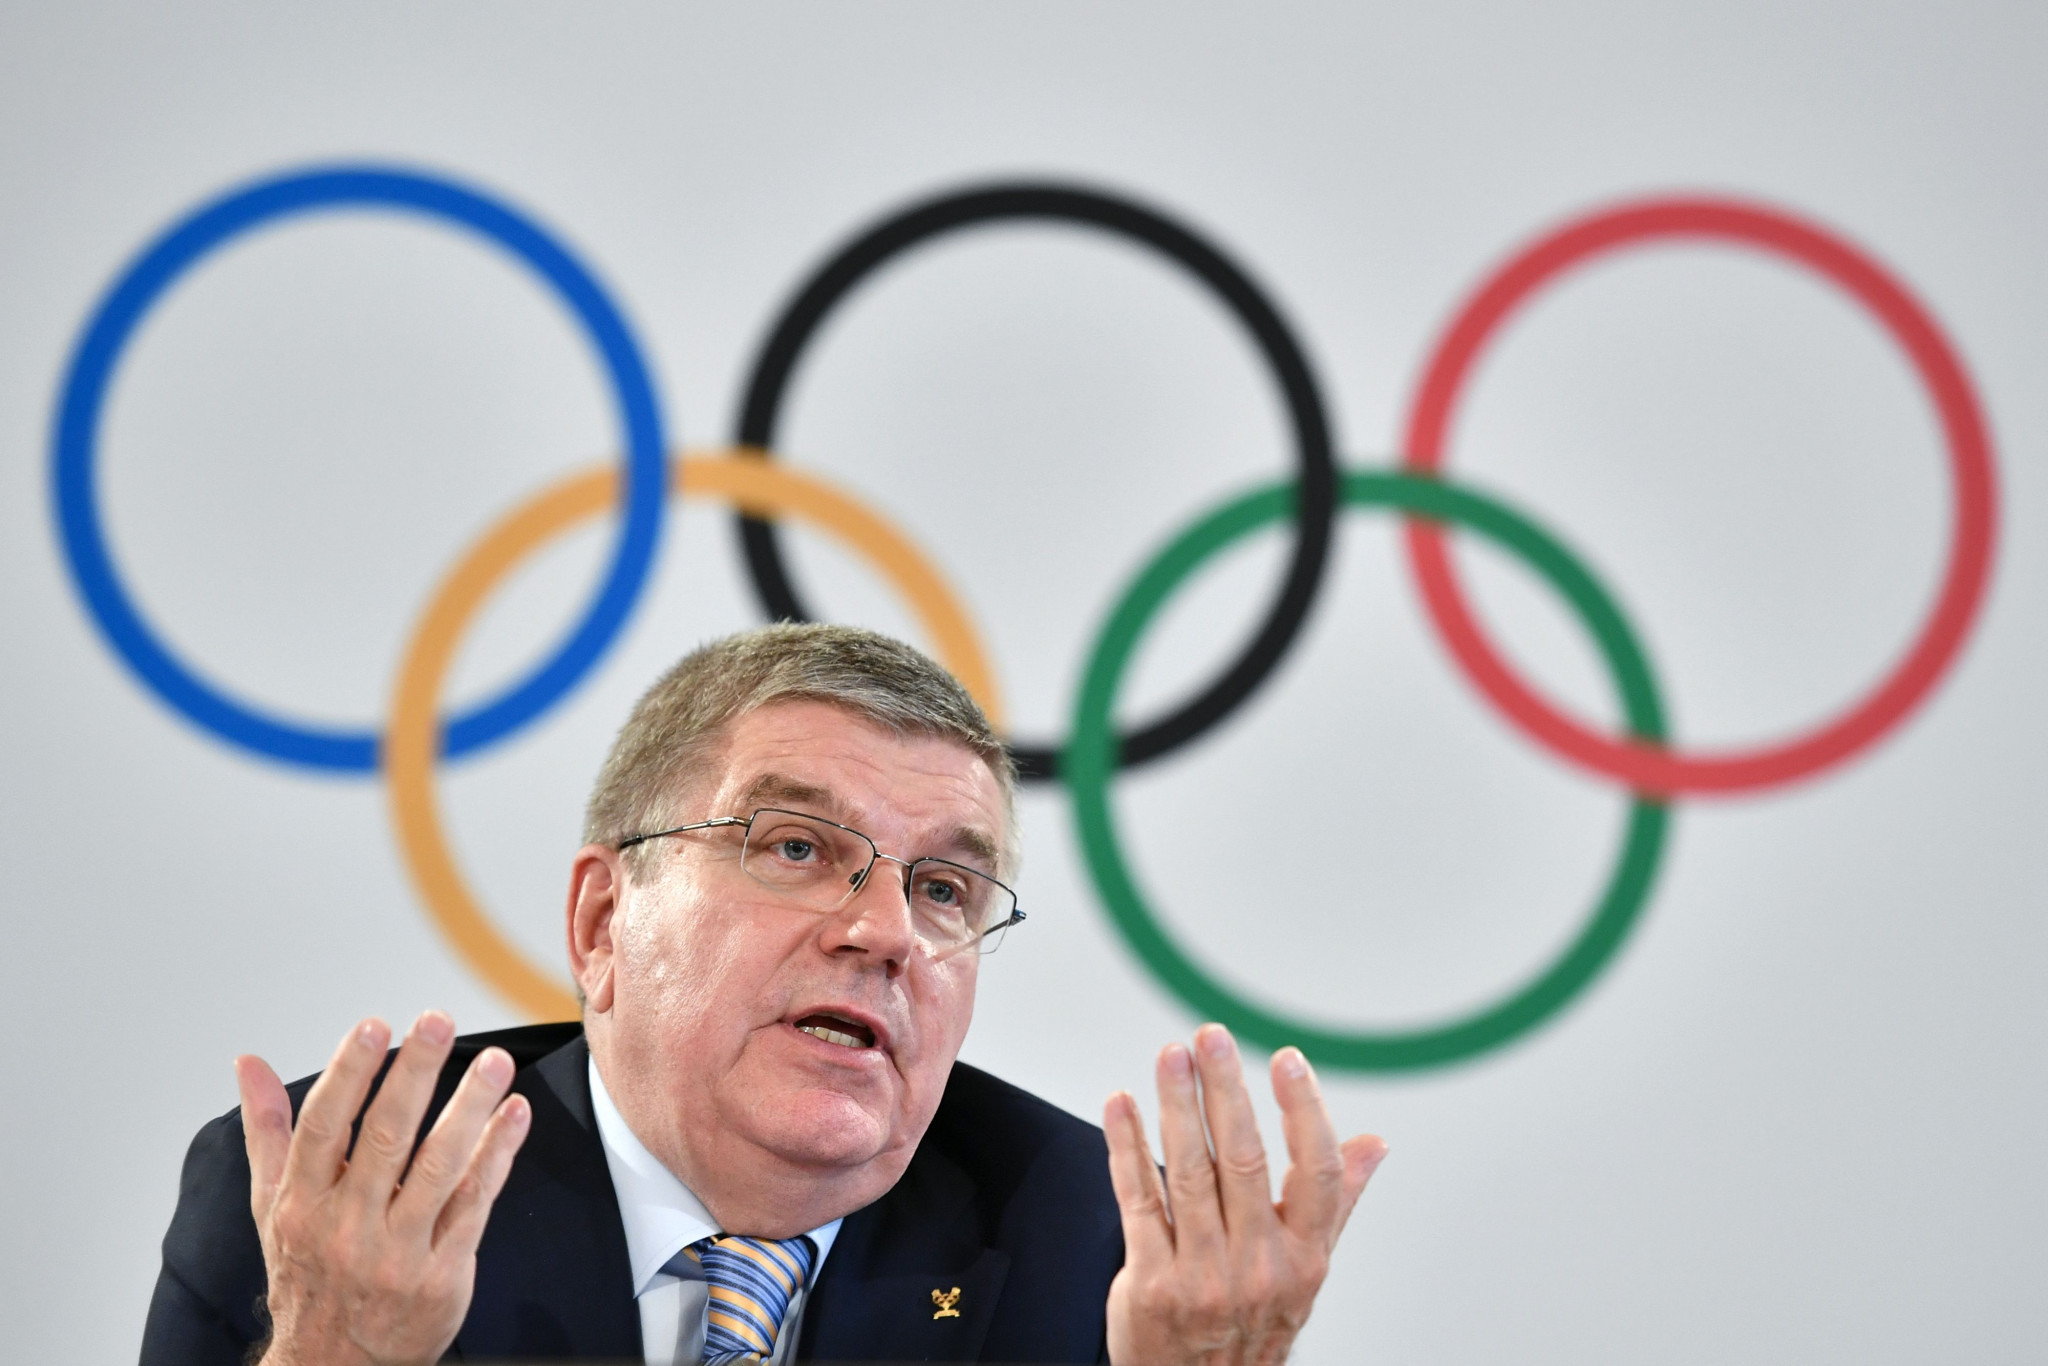 IOC President Thomas Bach said he was hopeful the UN would agree to their request ©Getty Images